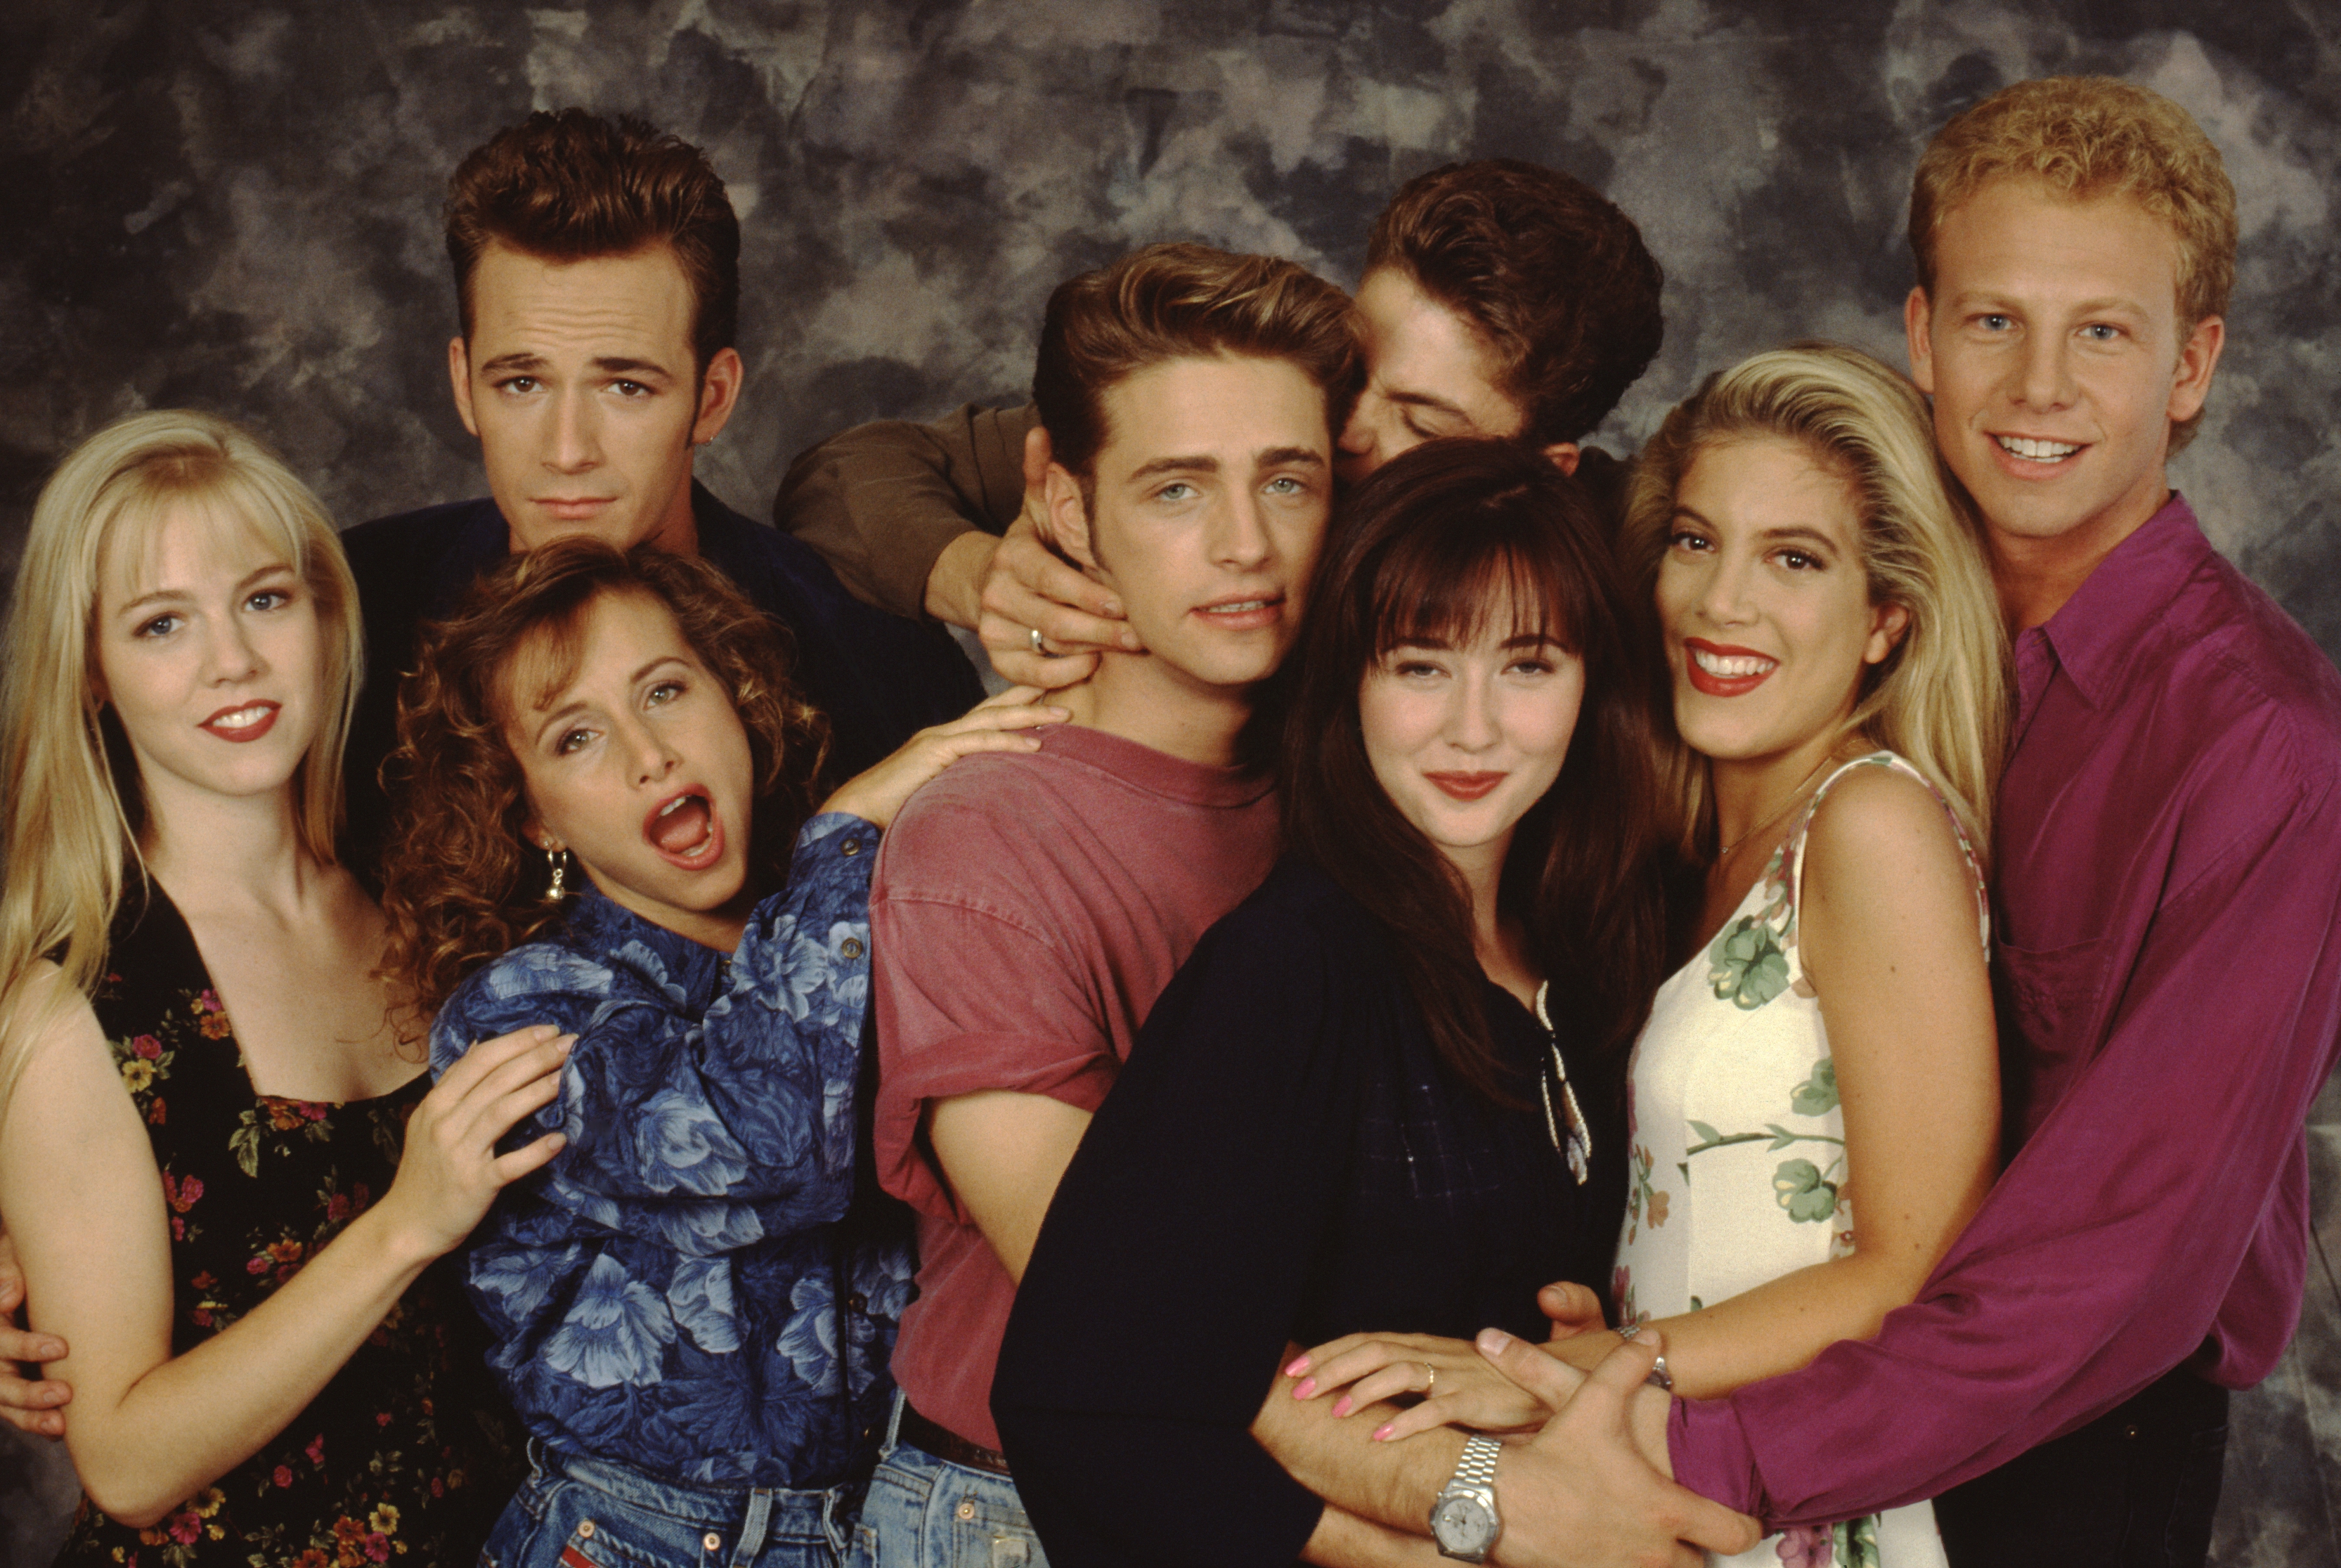 The cast of "Beverly Hills, 90210."